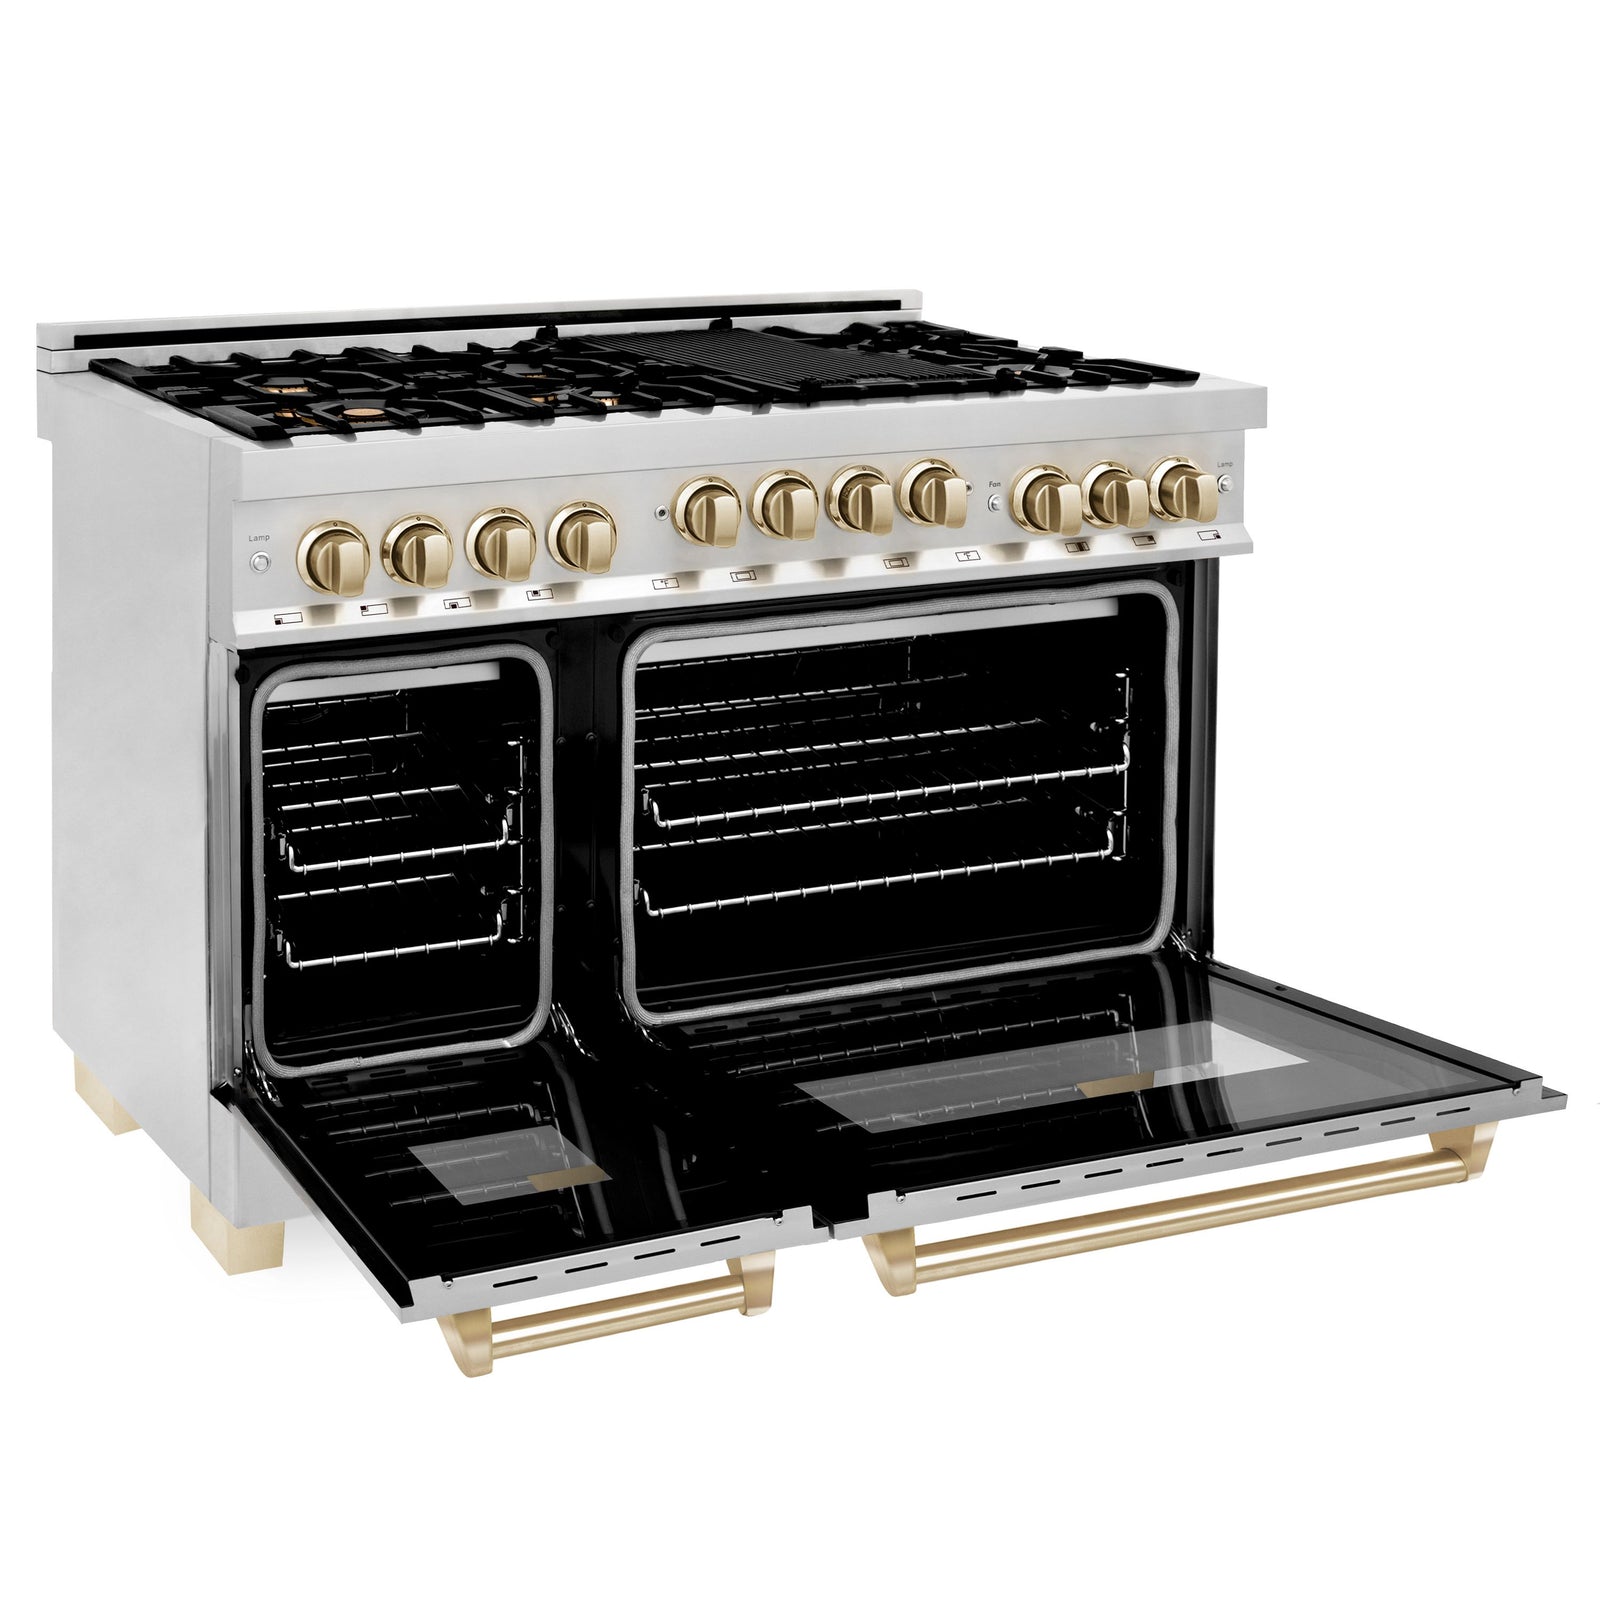 ZLINE Autograph Edition 48 Inch 6.0 cu. ft. Gas Range in Stainless Steel with Gold Accents, RGZ-48-G - Smart Kitchen Lab